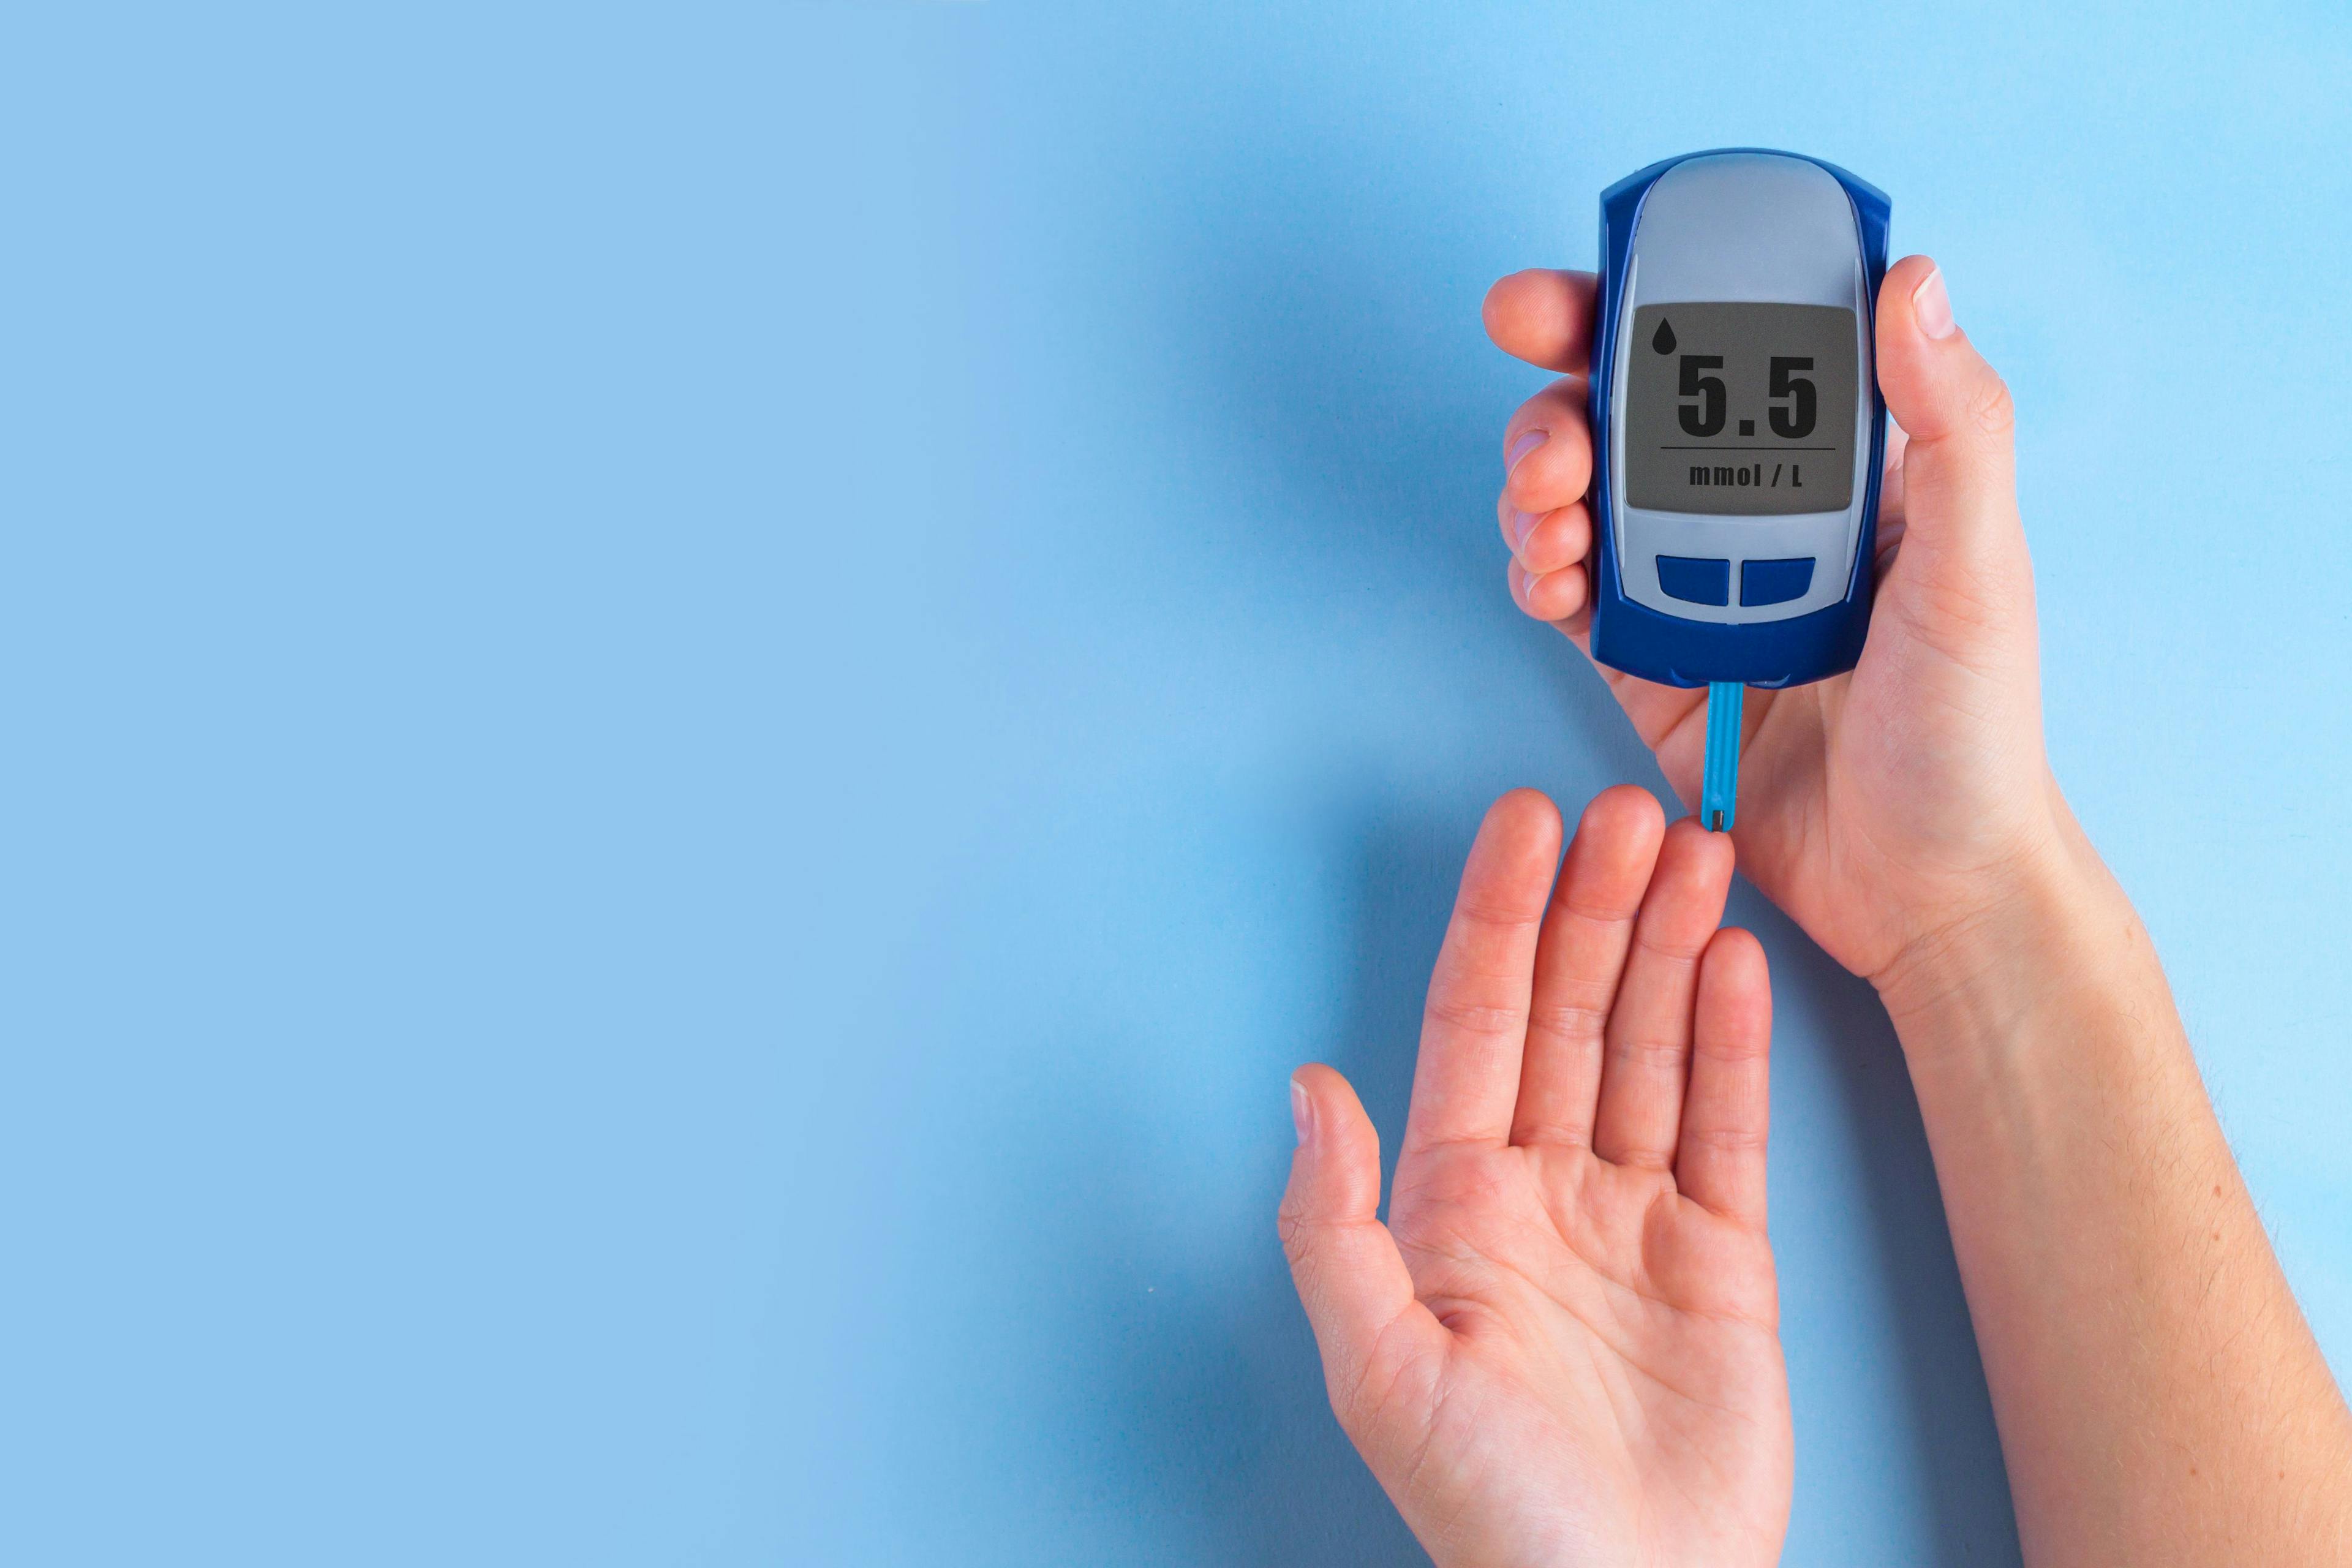 The diabetic measures the level of glucose in the blood. Diabetes concept. | Image Credit: Goffkein - stock.adobe.com